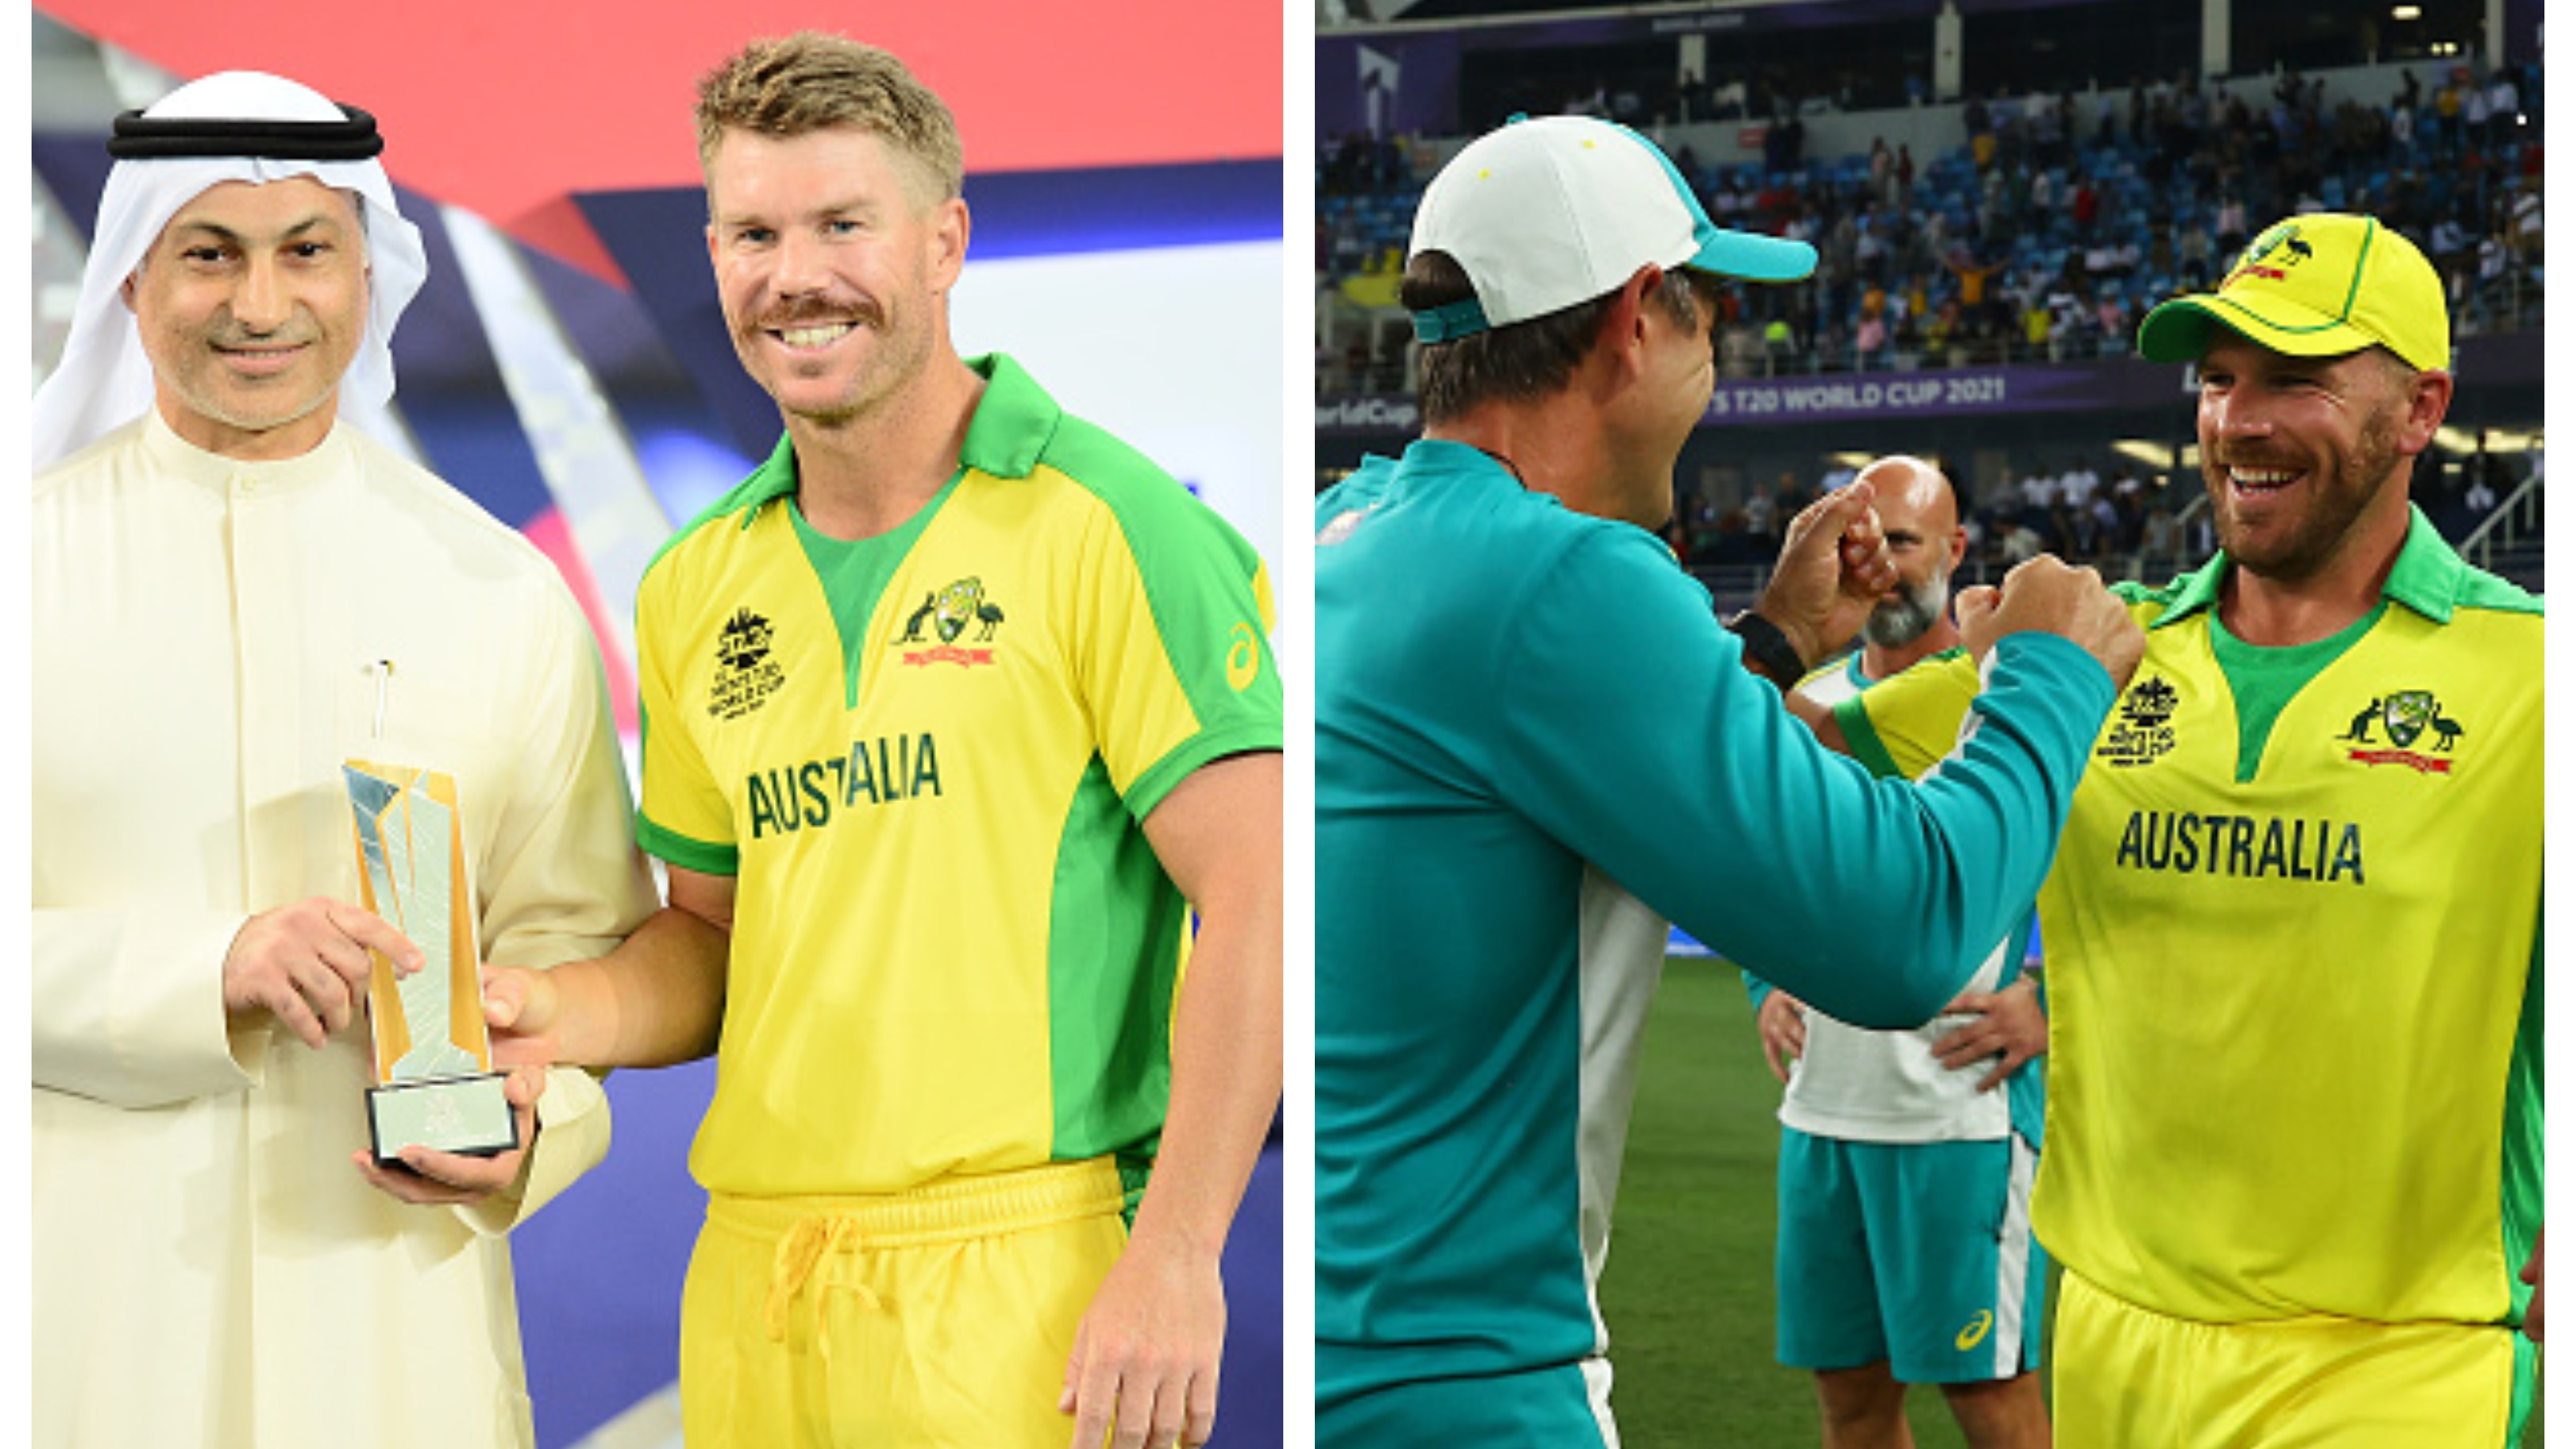 T20 World Cup 2021: ‘Warner will be Man of the Tournament’, Finch recalls his words to coach Langer few months ago